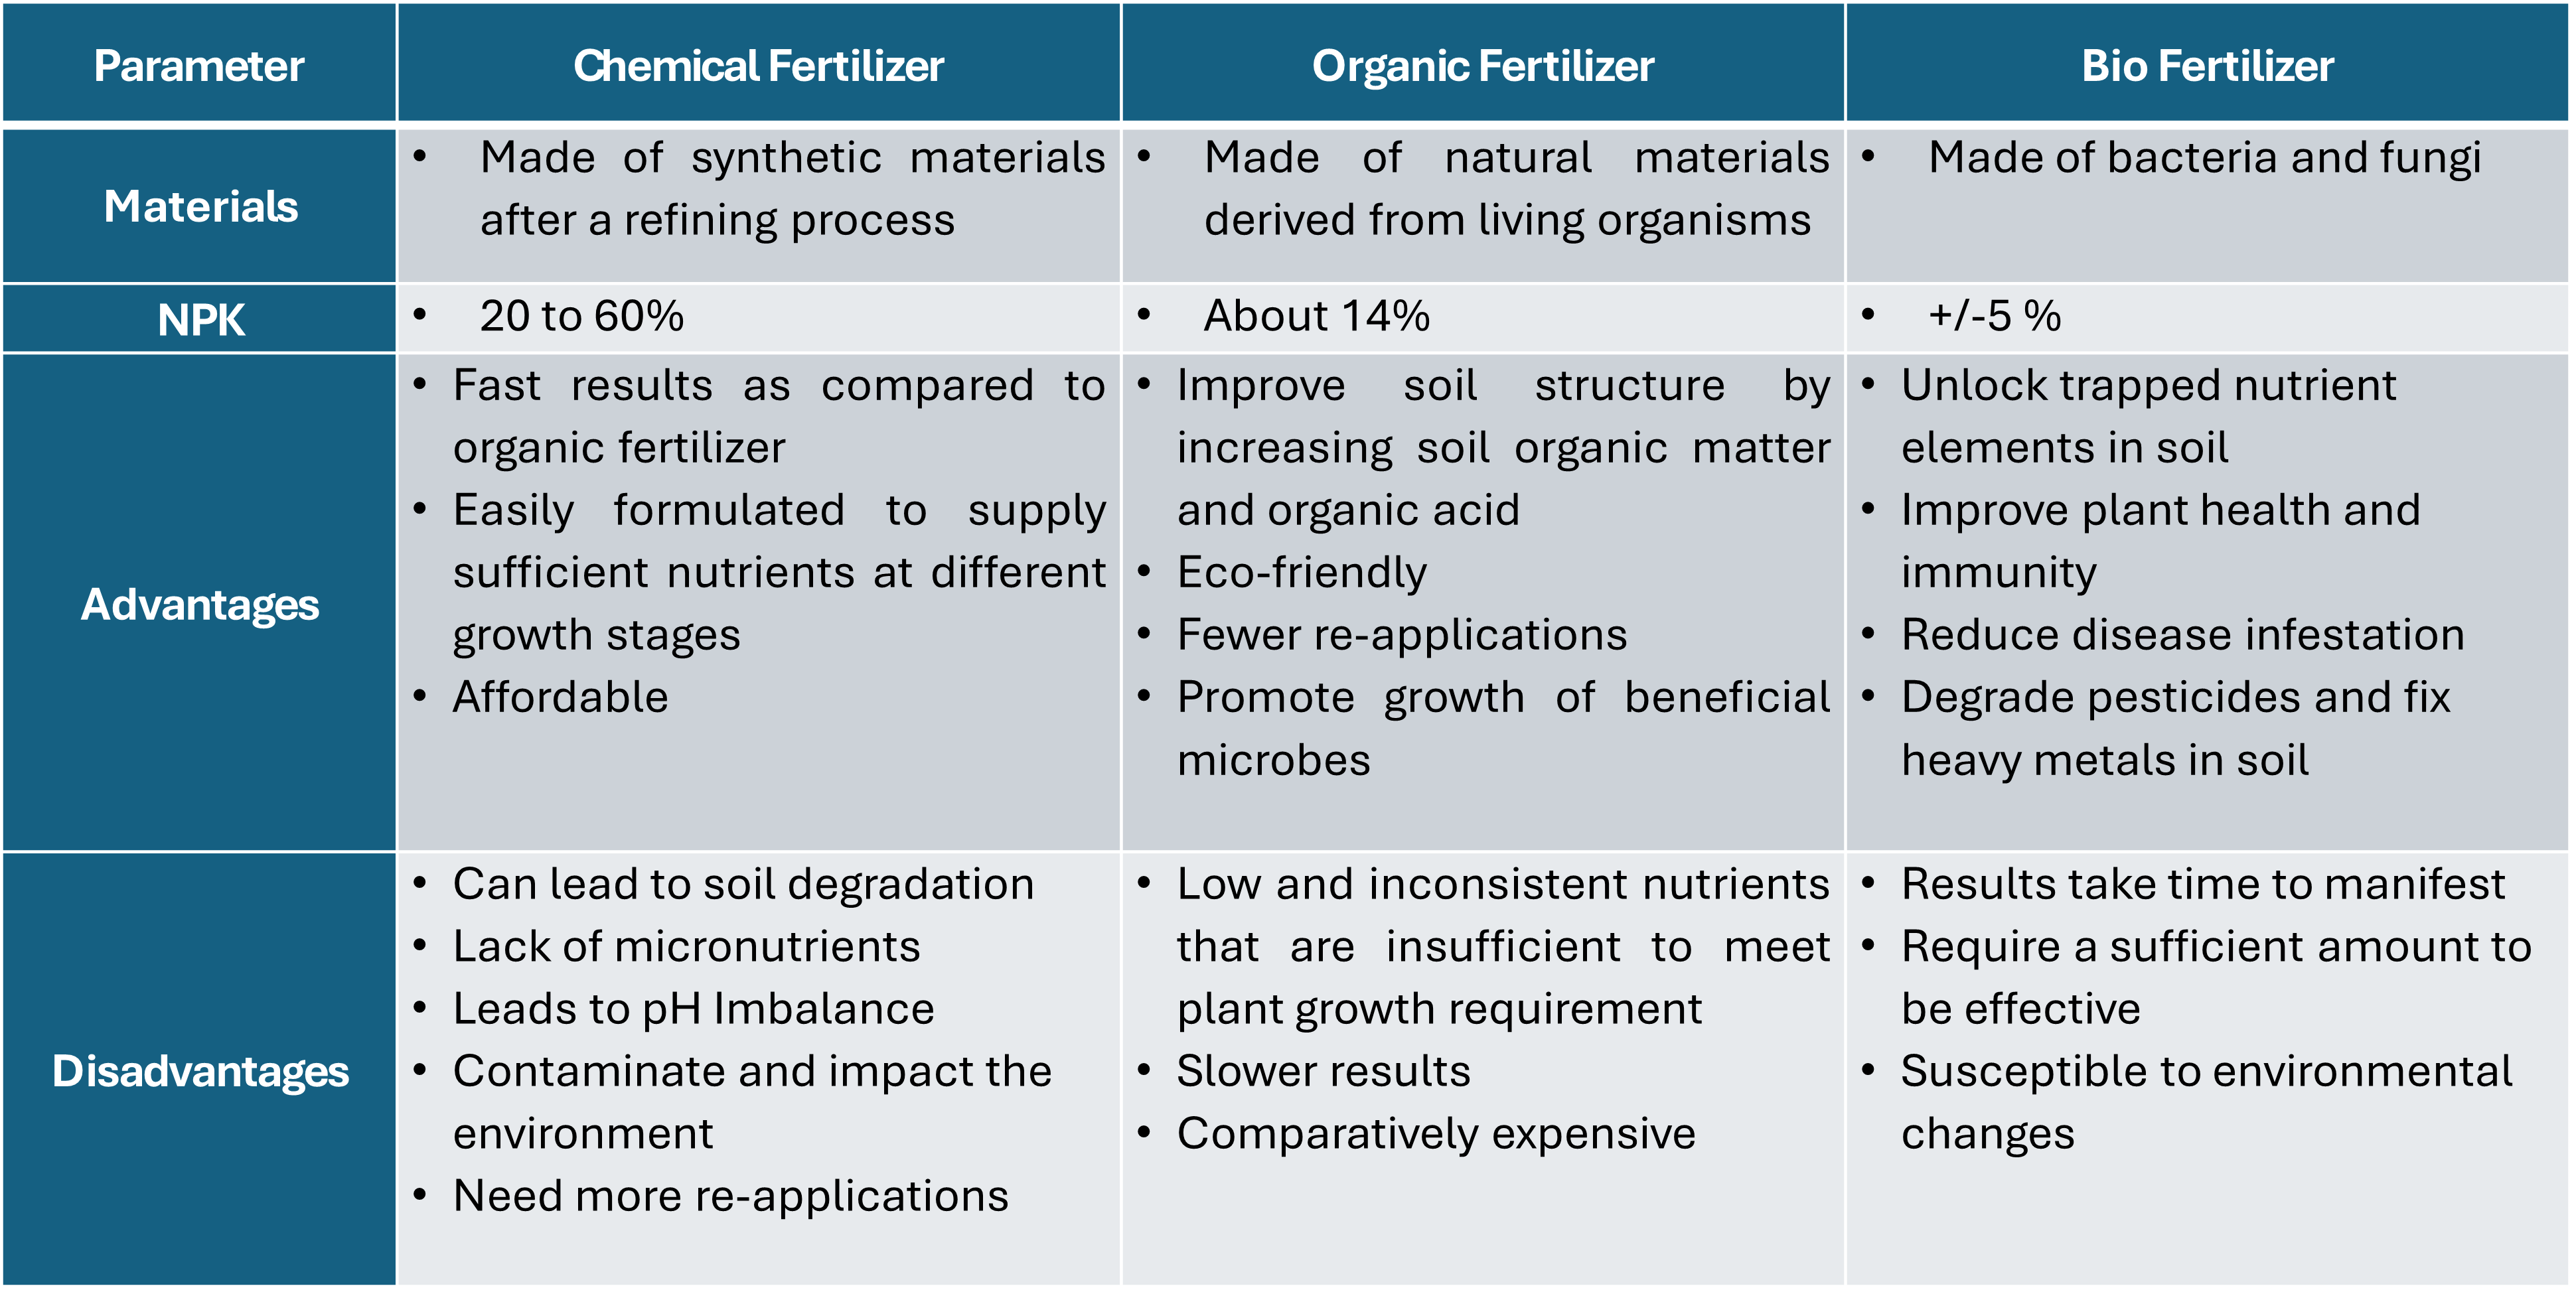 Comparison and summary of the different types of common fertilizers